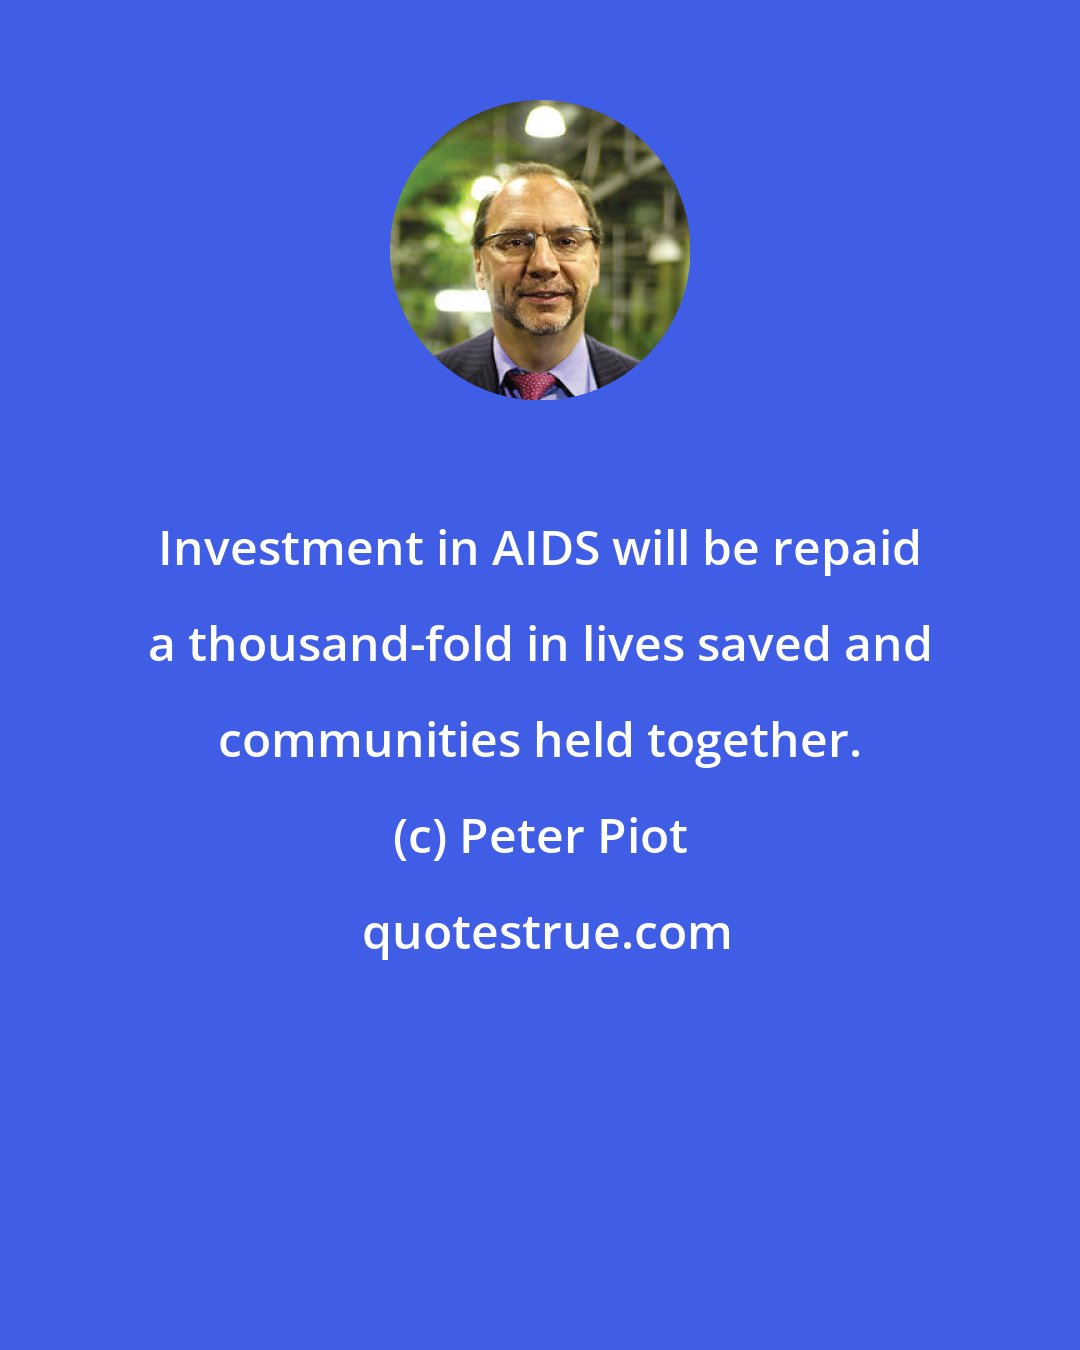 Peter Piot: Investment in AIDS will be repaid a thousand-fold in lives saved and communities held together.